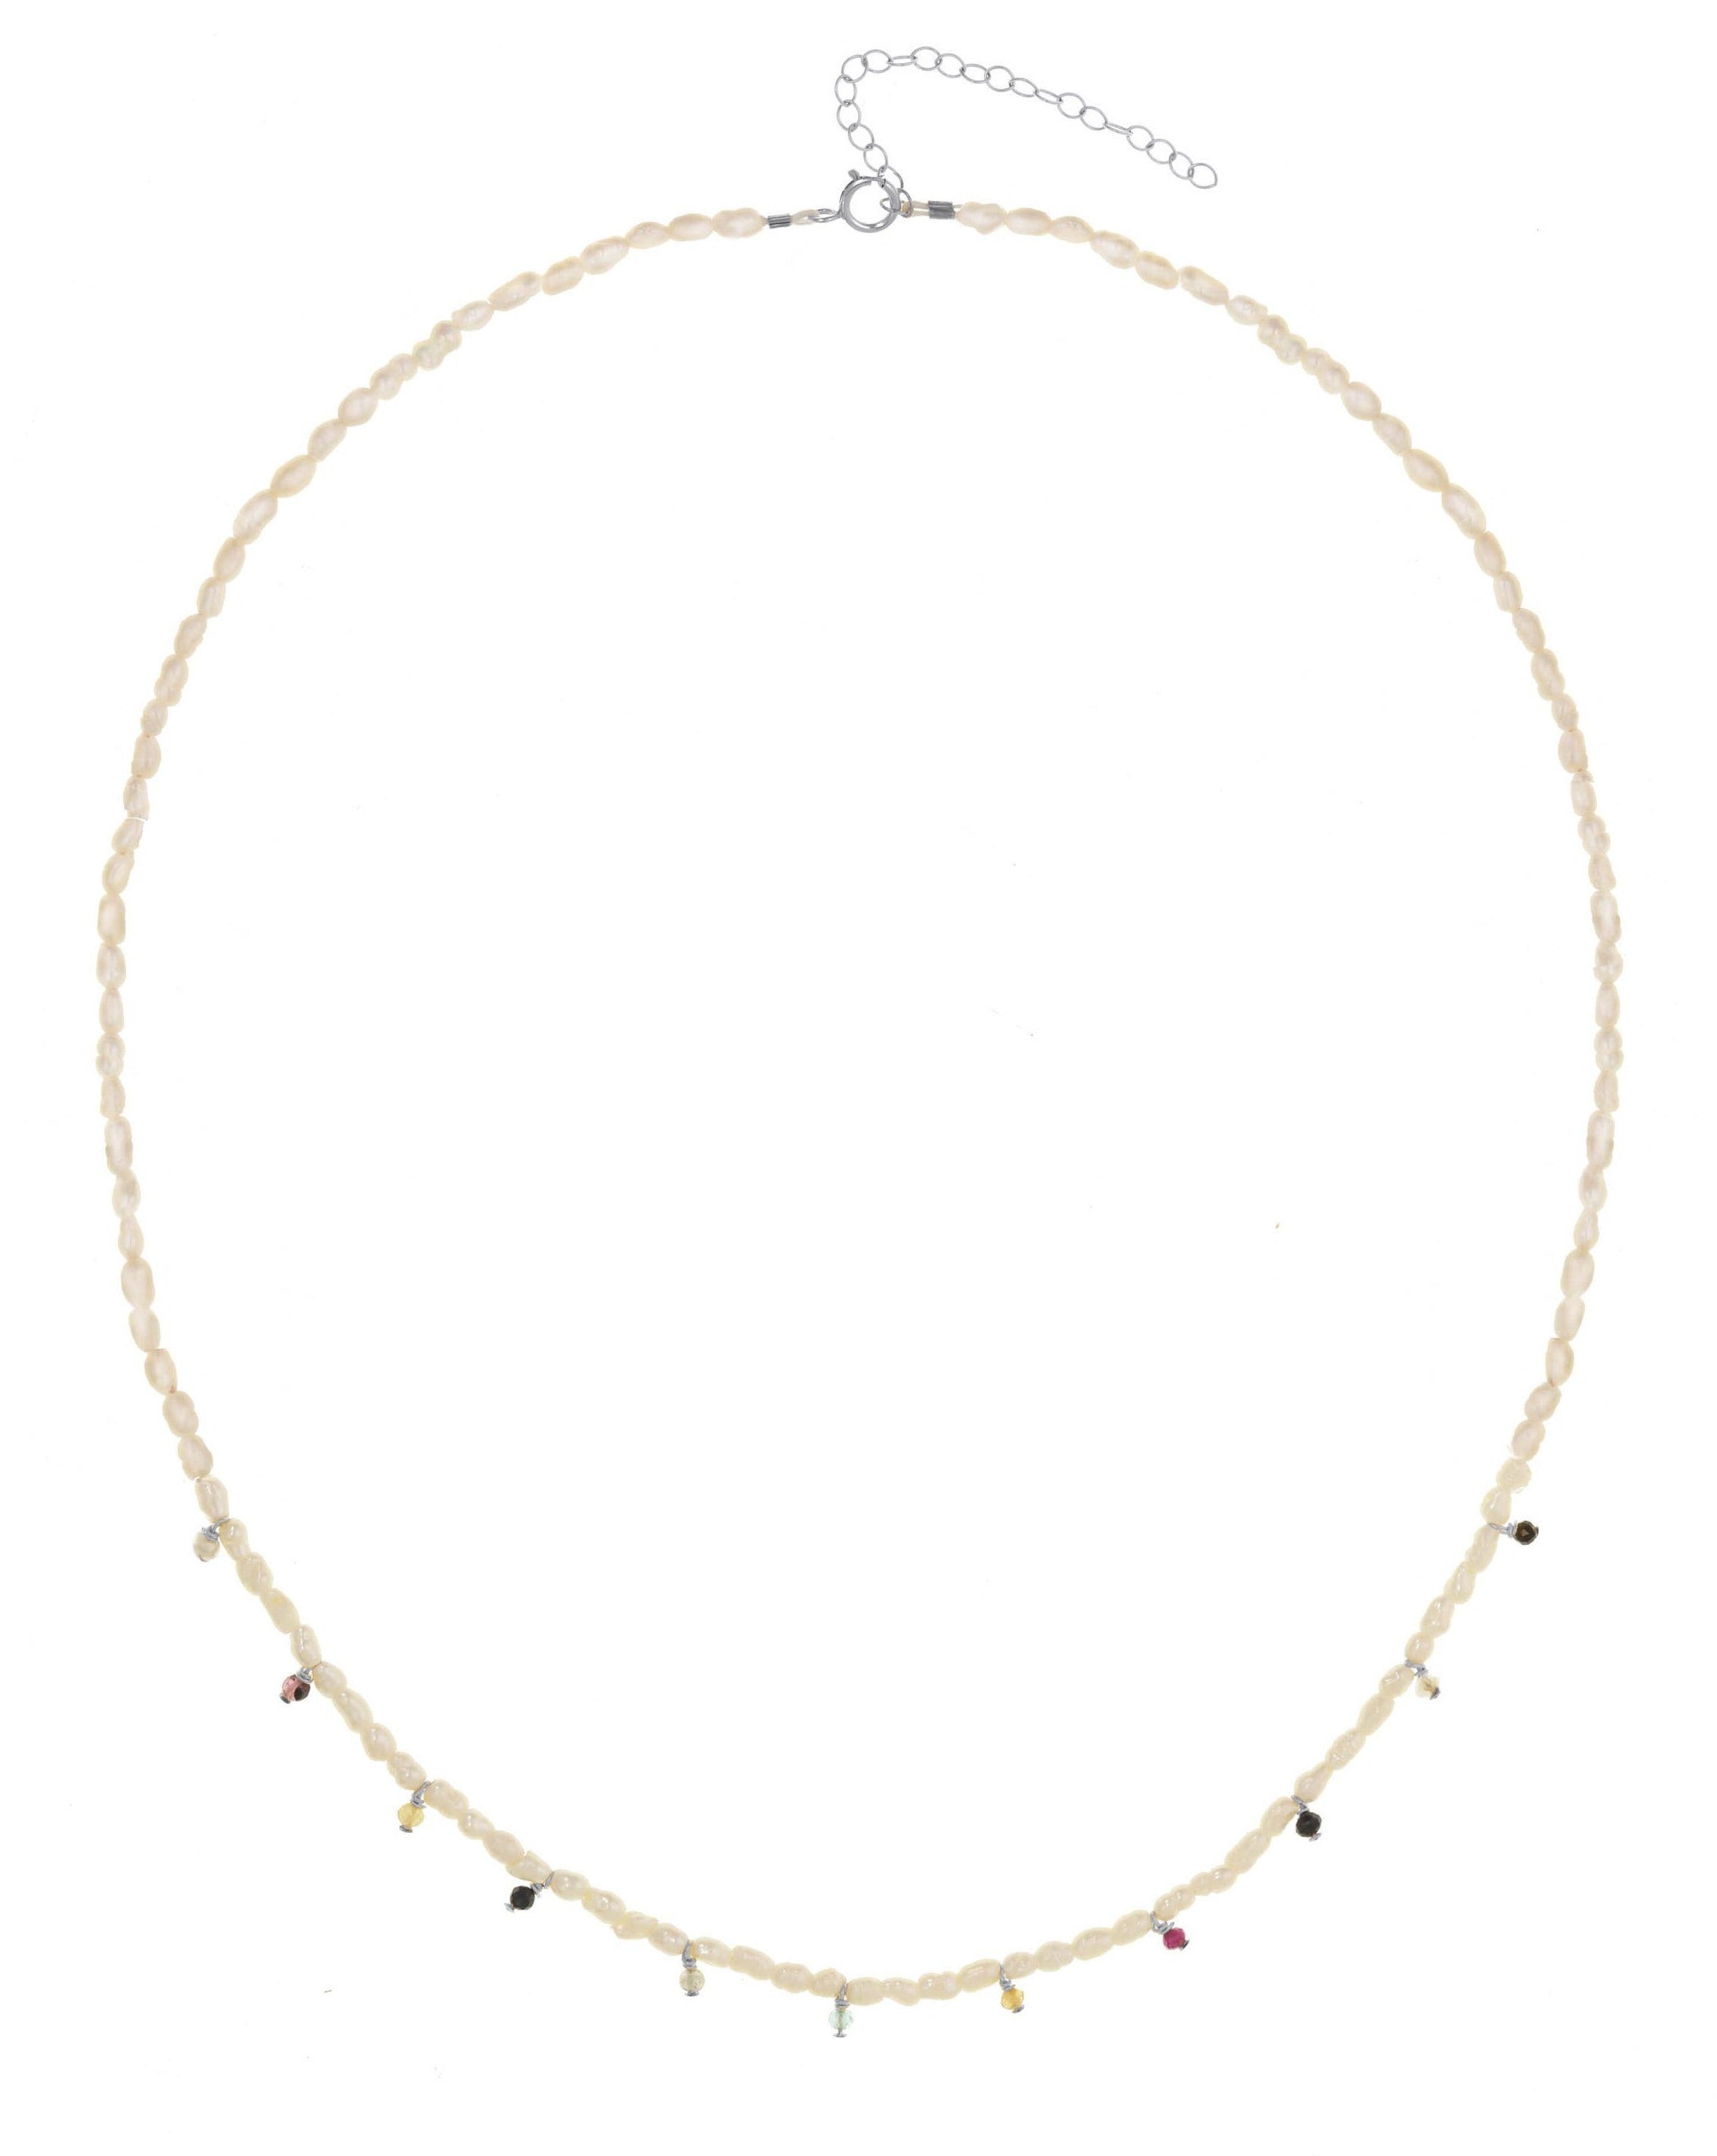 Fiesta Necklace by KOZAKH. A 16 to 18 inch long strand of Freshwater Rice Pearl necklace, crafted in Sterling Silver, featuring Aquamarine, Sapphire, Ruby, and Tourmaline gemstones.